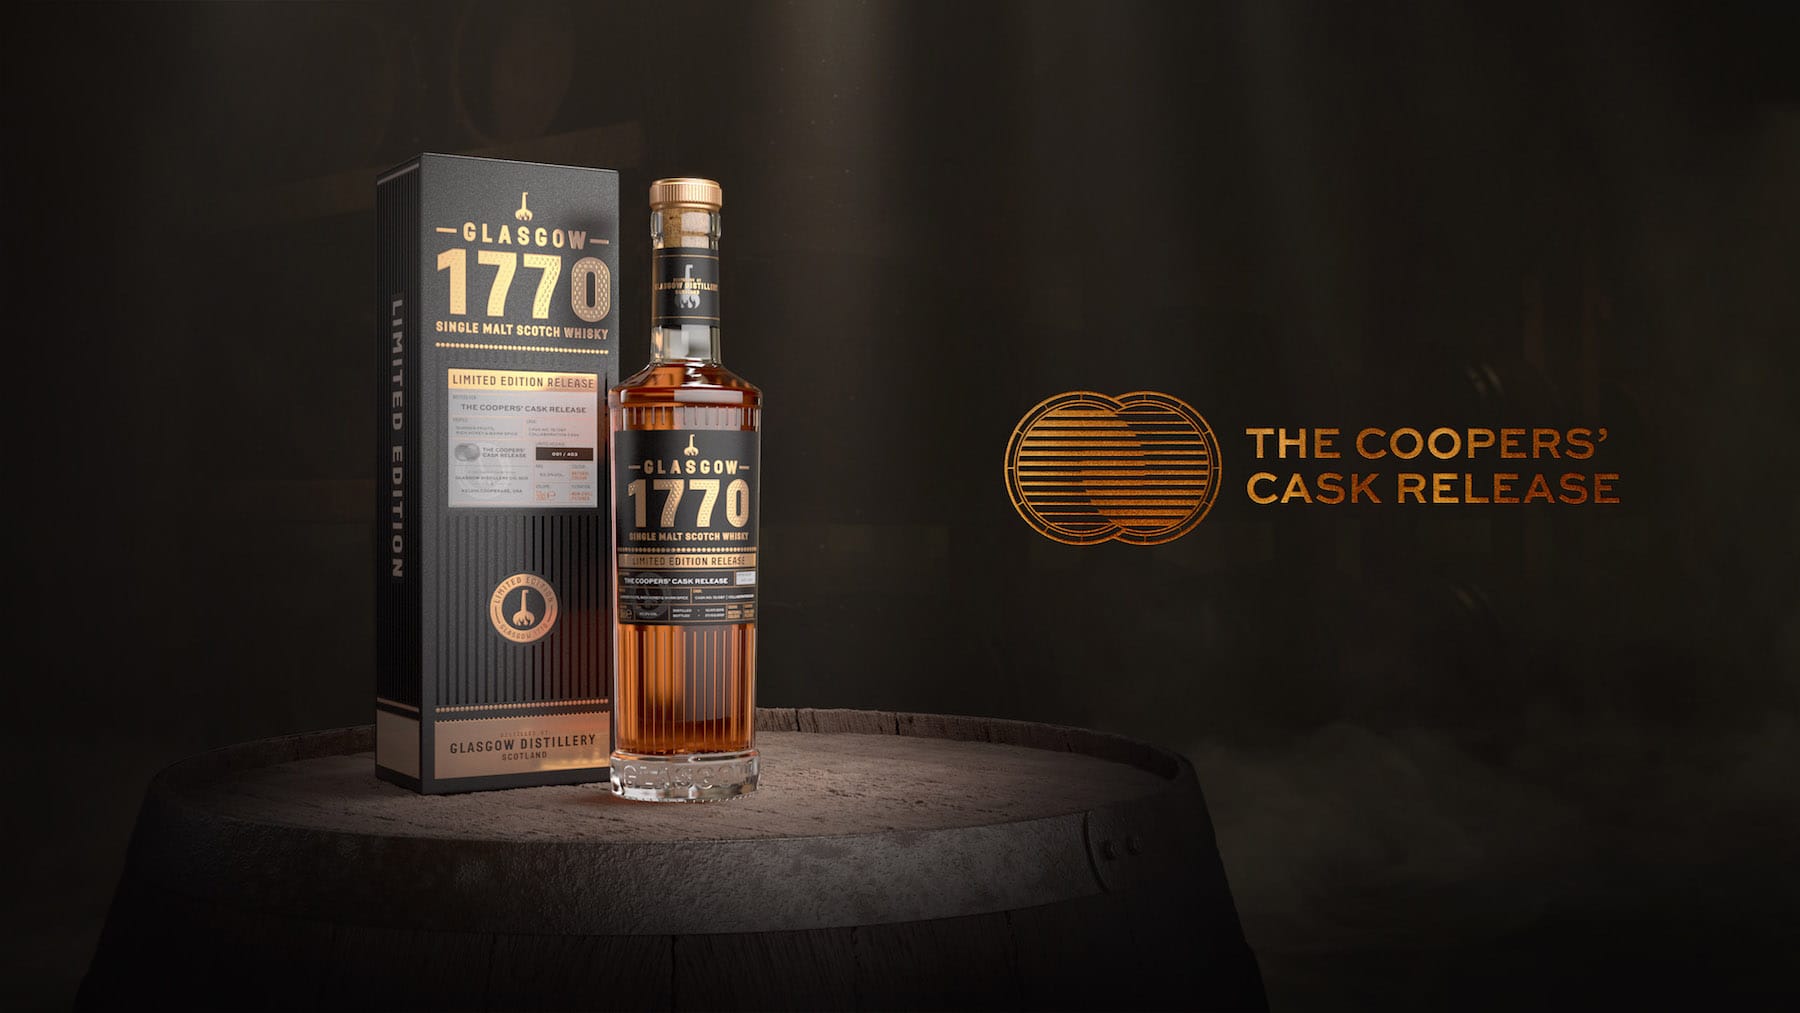 Glasgow Distillery Launch Exclusive Glasgow 1770 The Coopers’ Cask Release